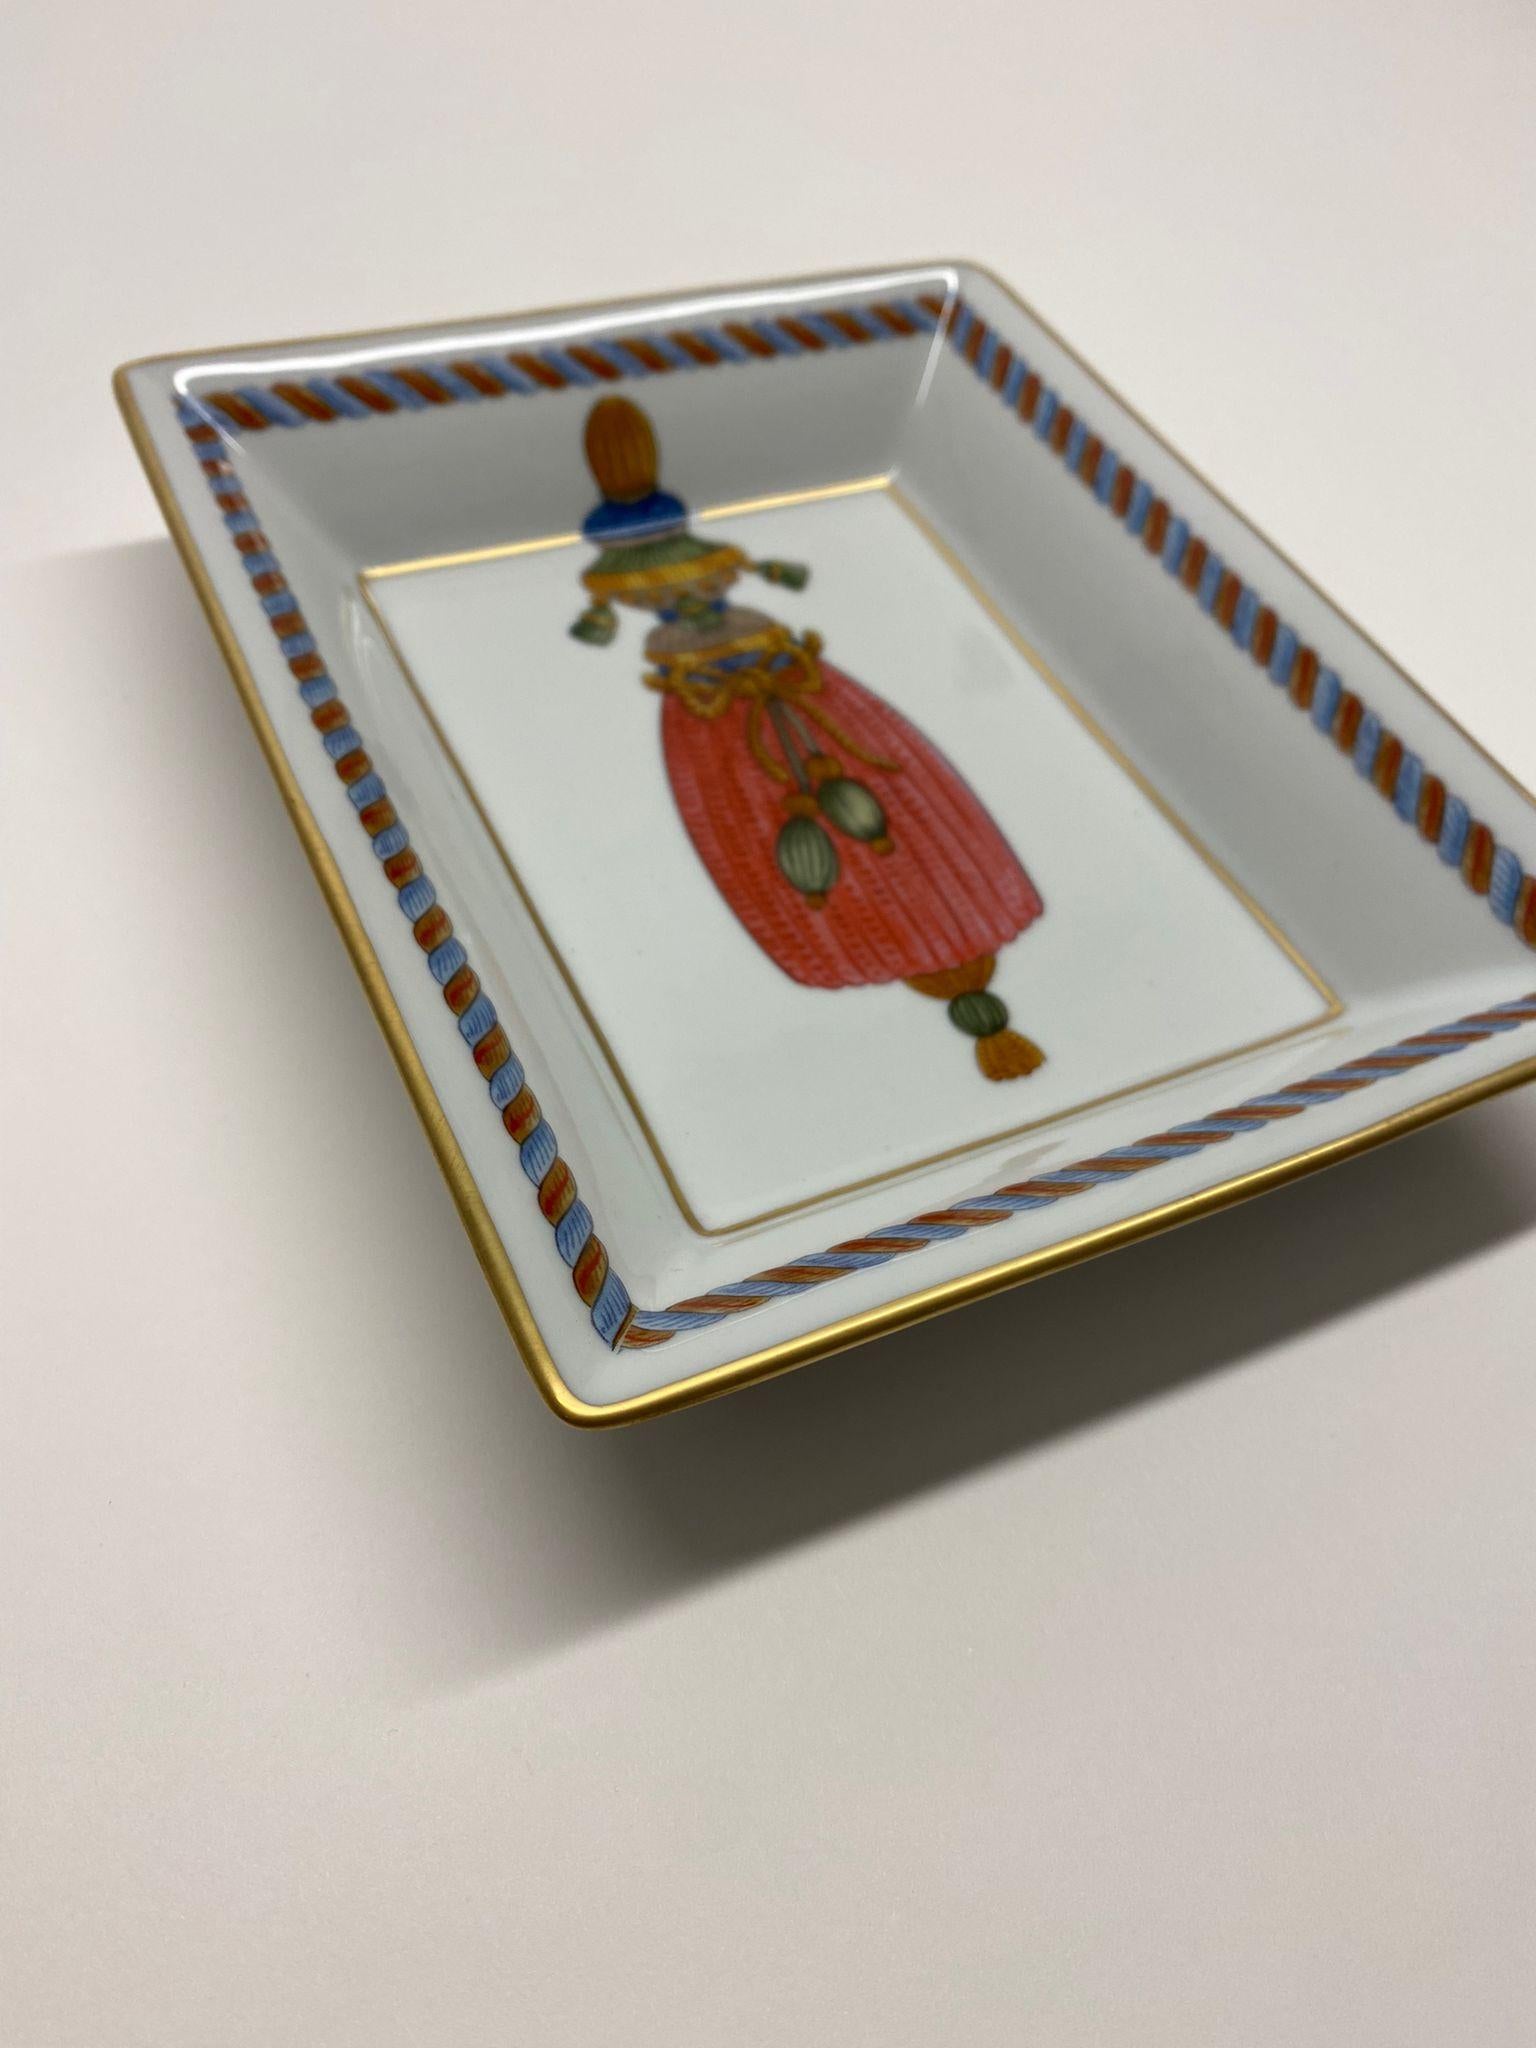 Italian craftsmanship Ashtray decorated withcoloured elegant decoration with real gold finishes.
Entirely made in Florence by our master craftsmen.

Artecornici design produces hand colored art prints, artisan frames, lightings, decorative